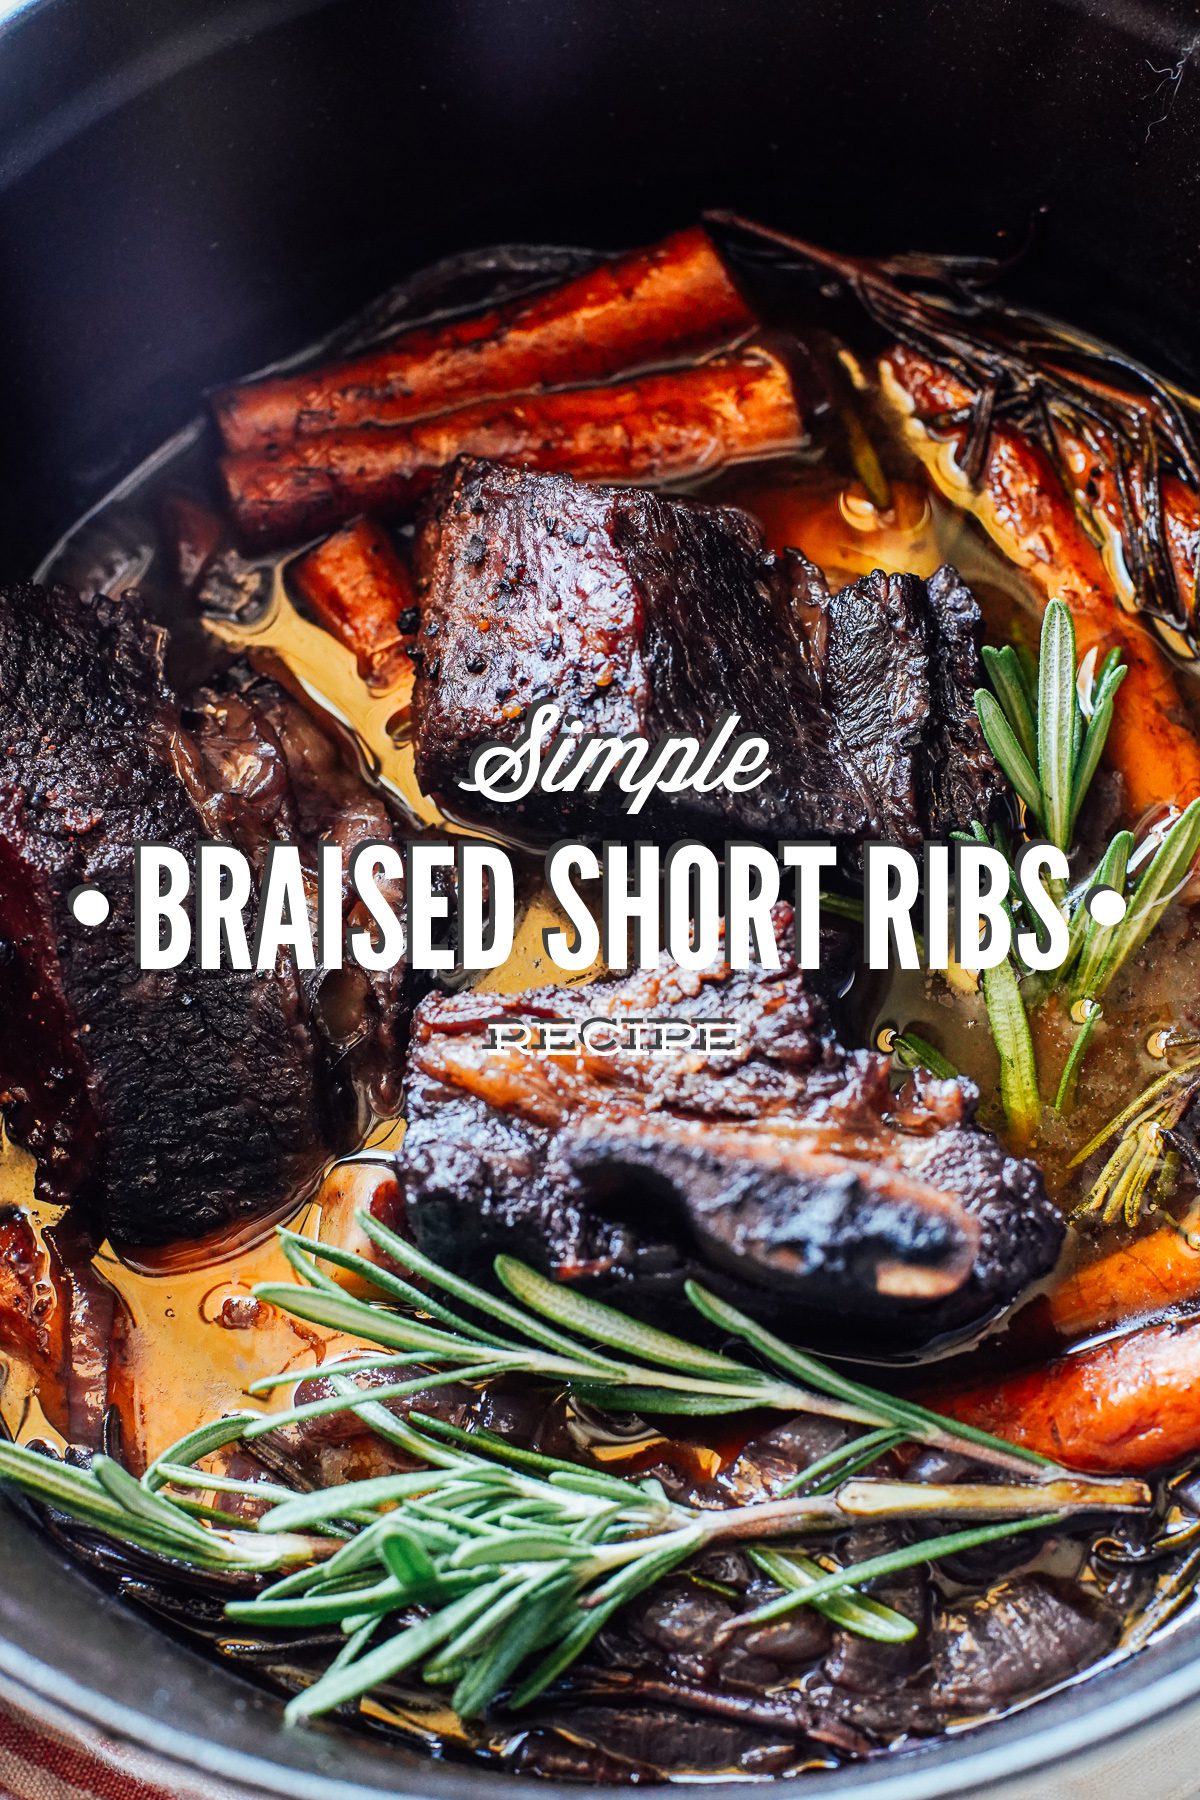 A Simple Recipe For Braised Short Ribs